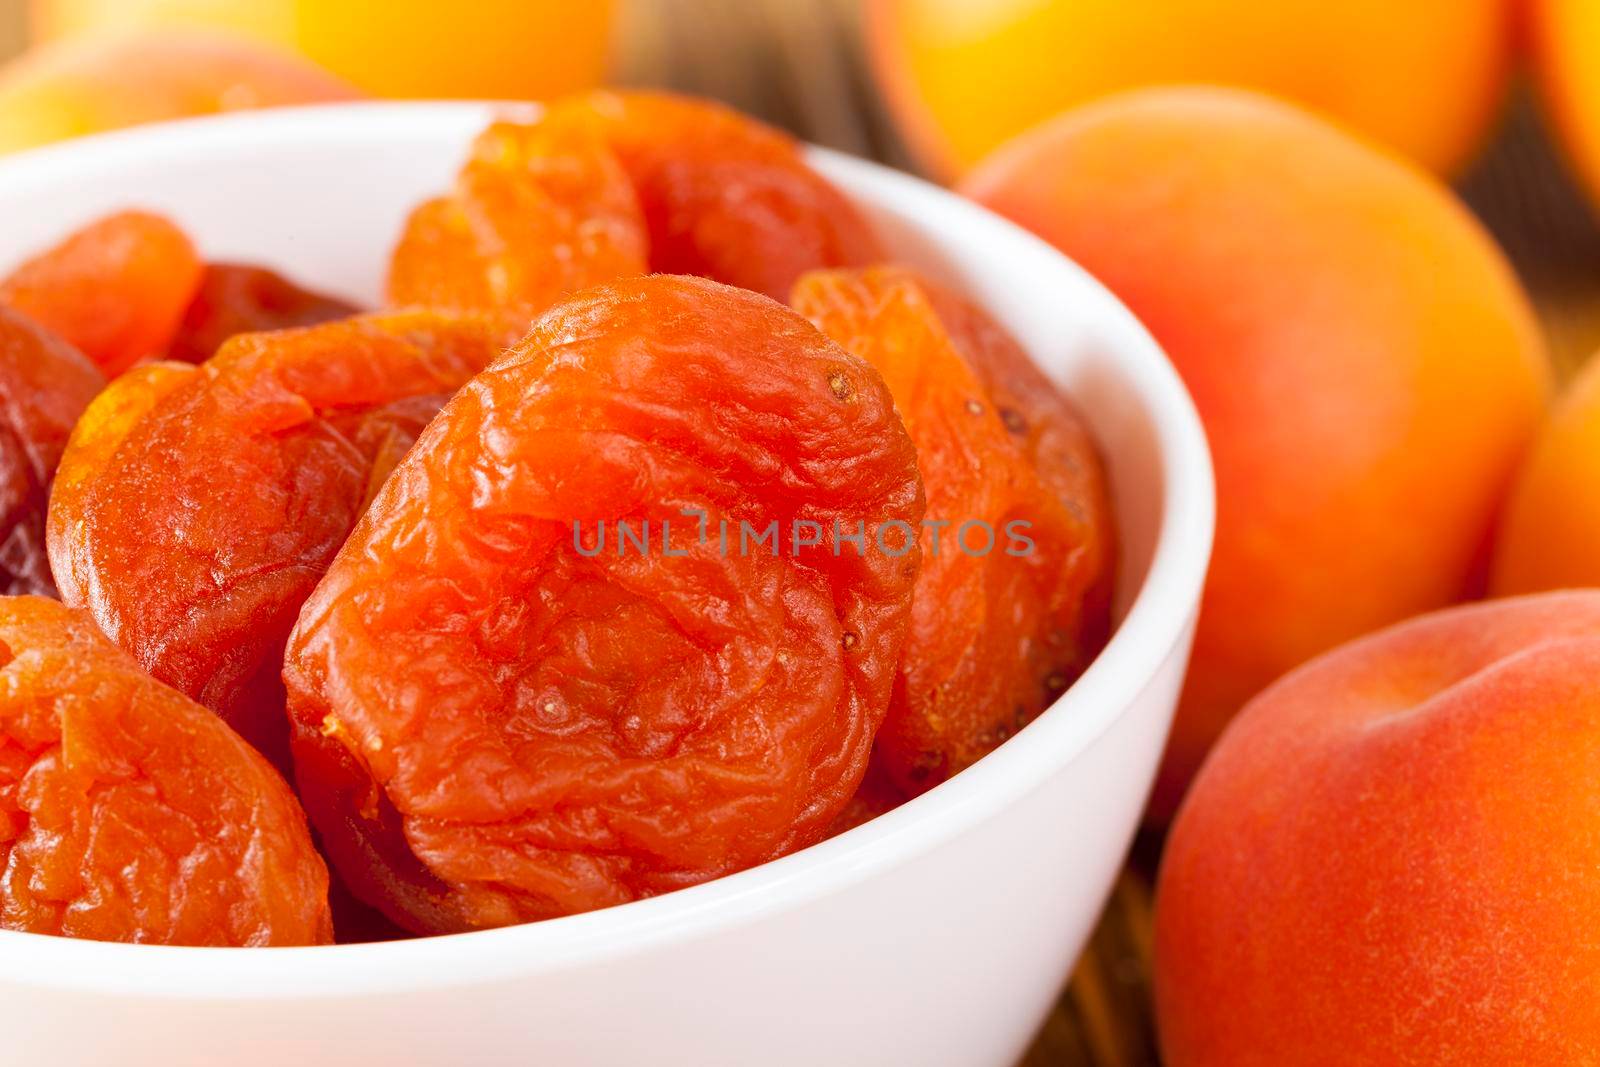 new dried apricots and fresh fruits lying together during the preparation of desserts, closeup